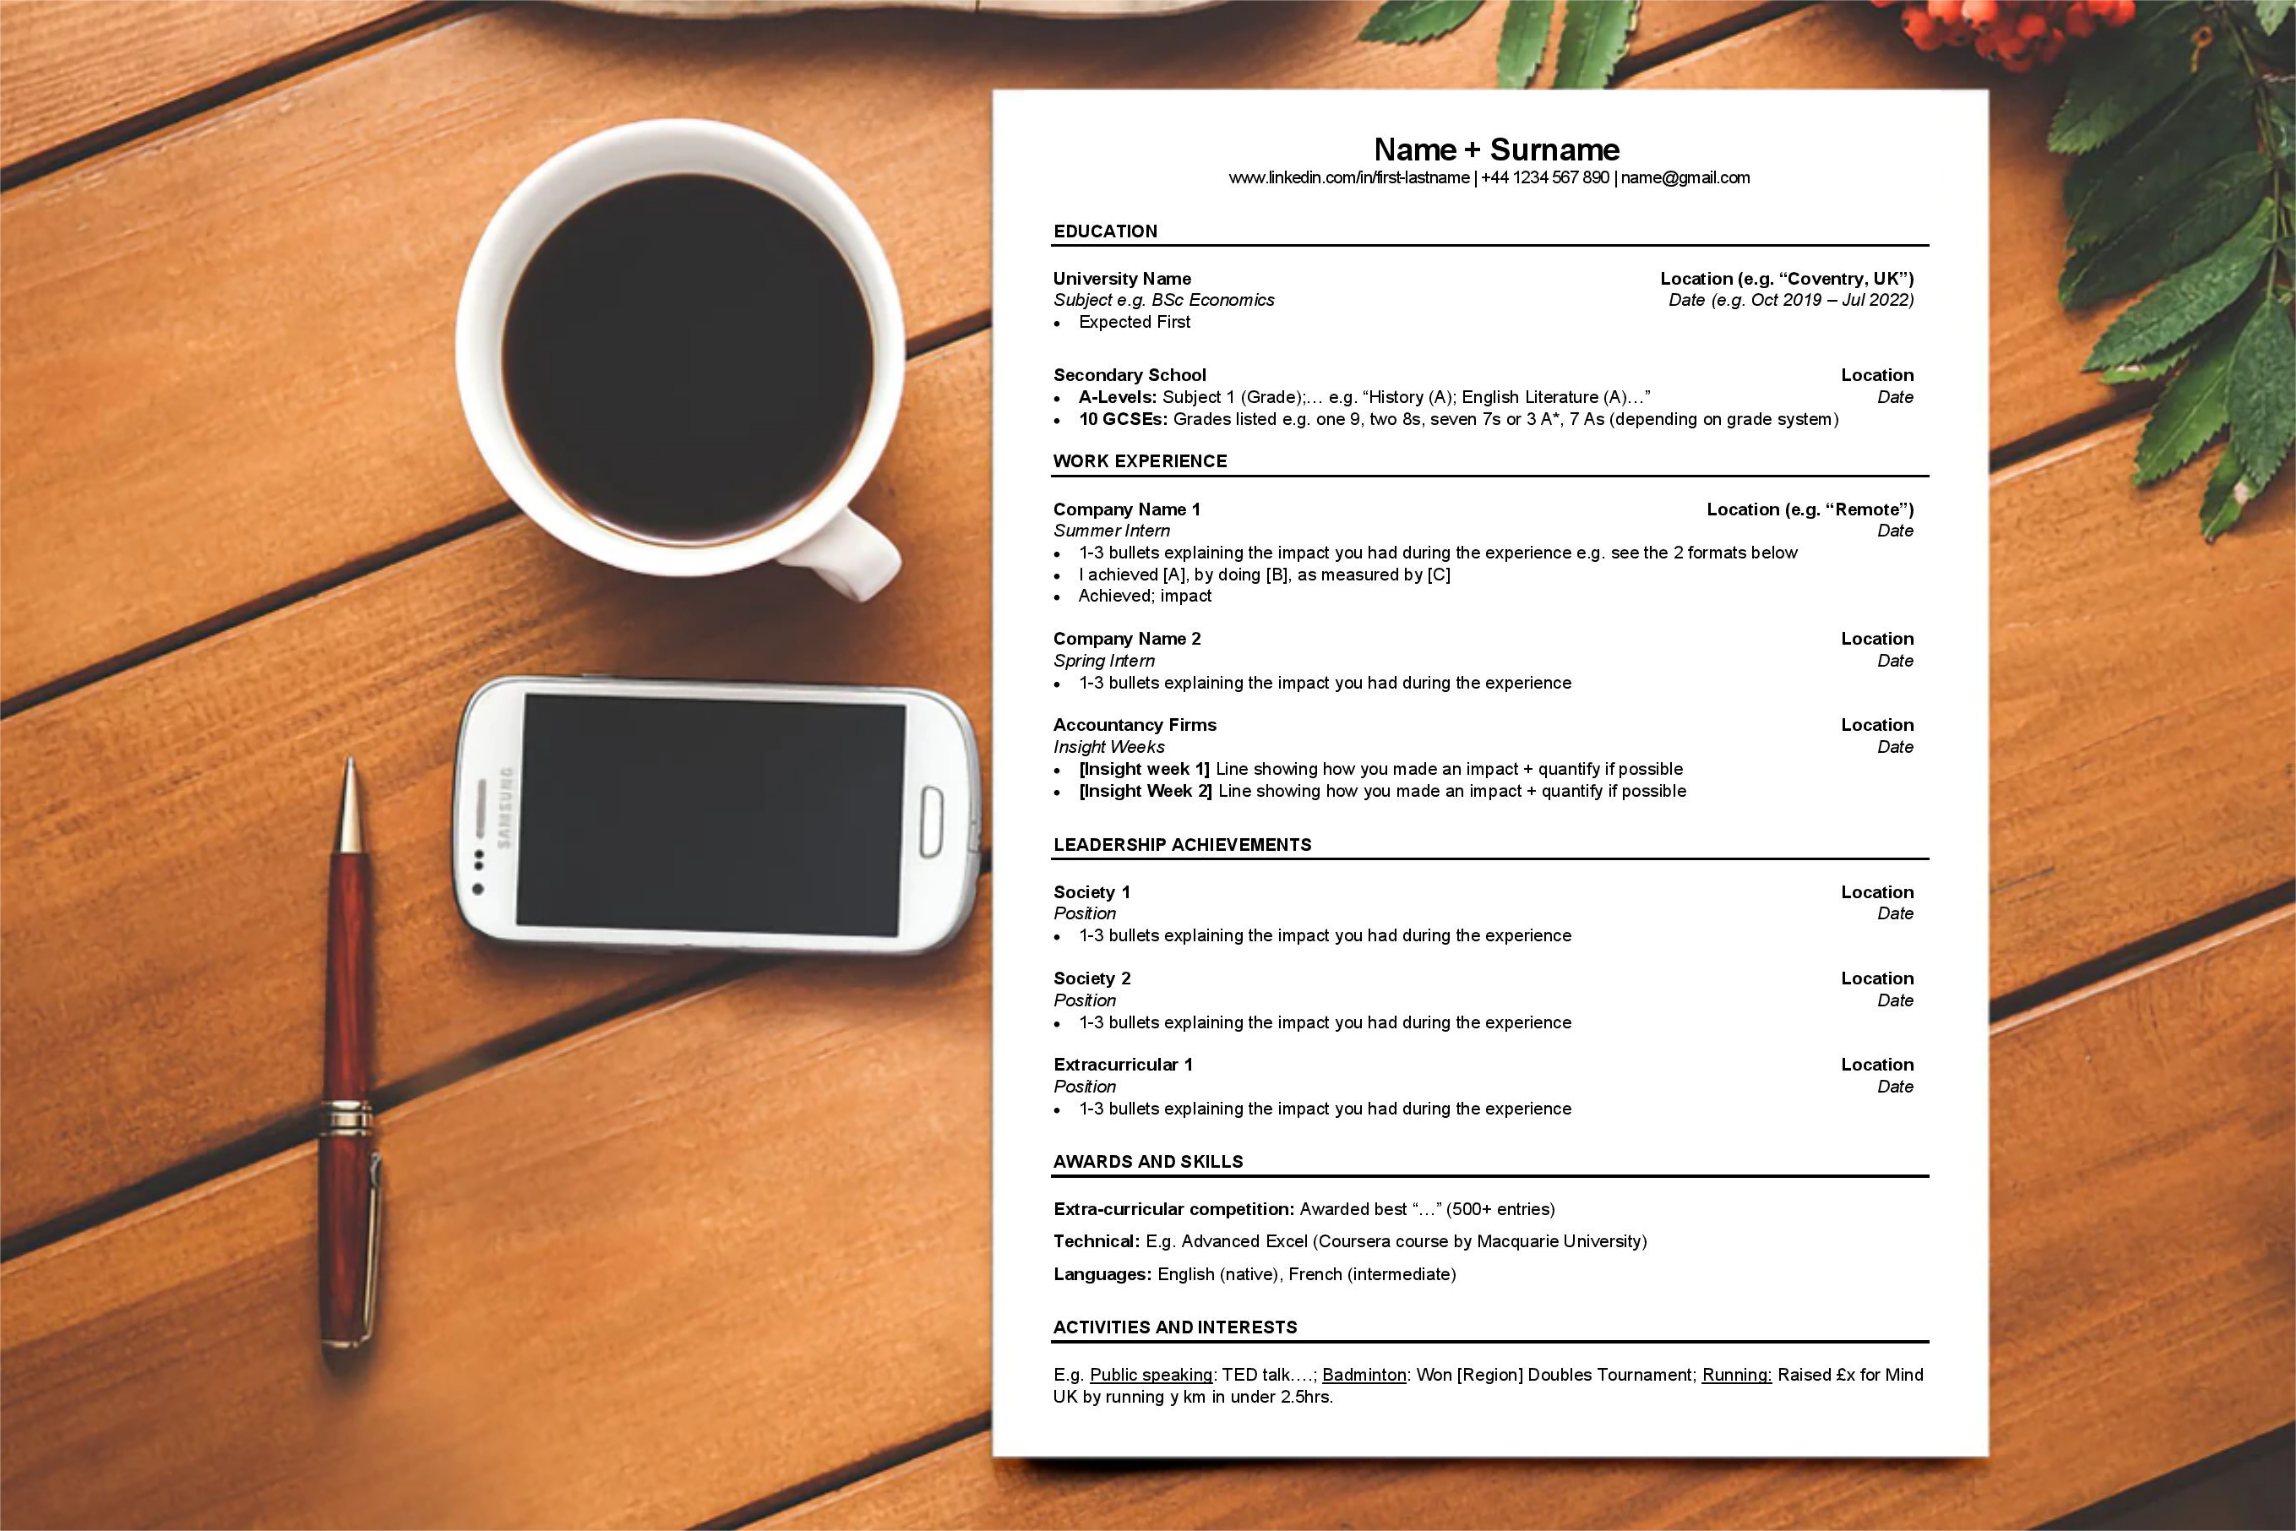 Investment Banking CV Template UK